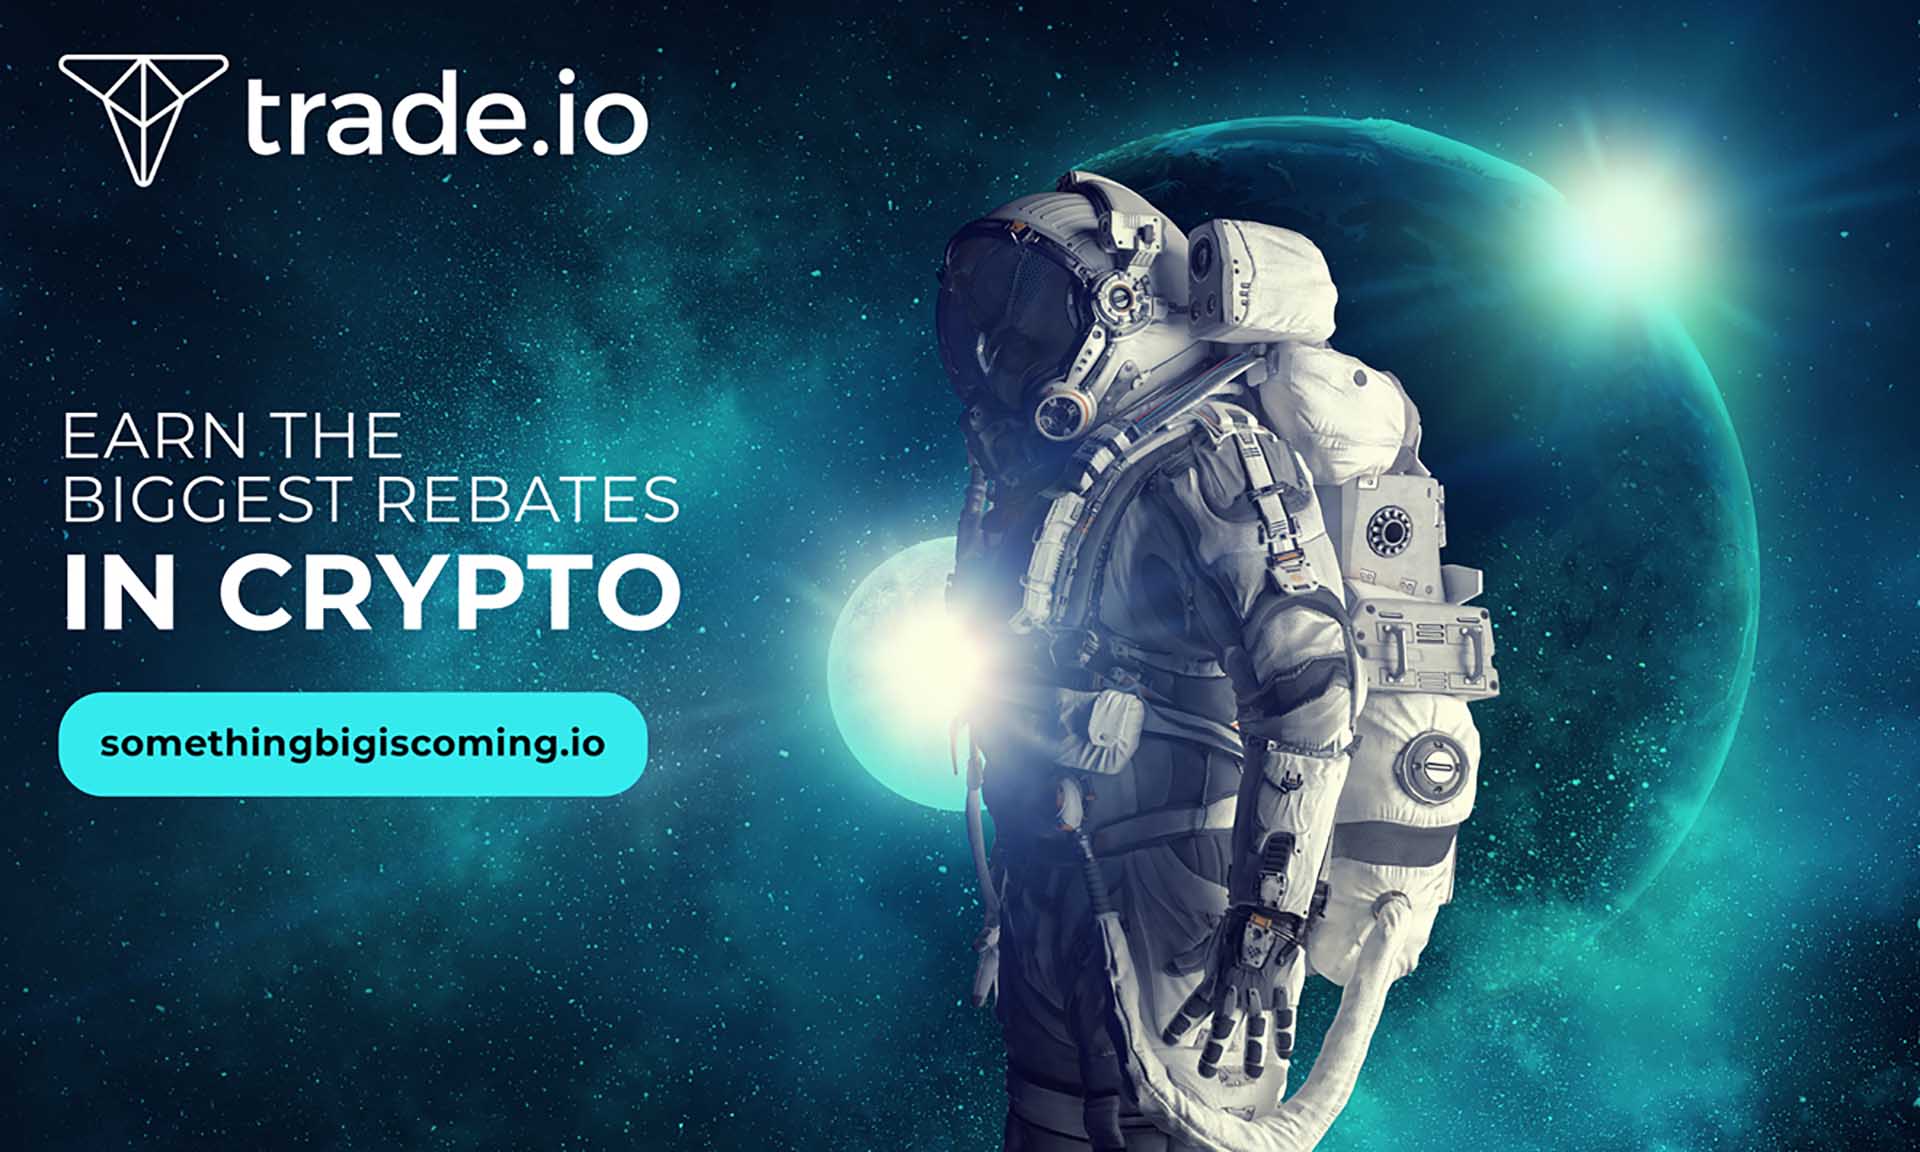 trade.io Opens Pre-Registration To One Of The Crypto Industry’s Most Rewarding Affiliate Programs